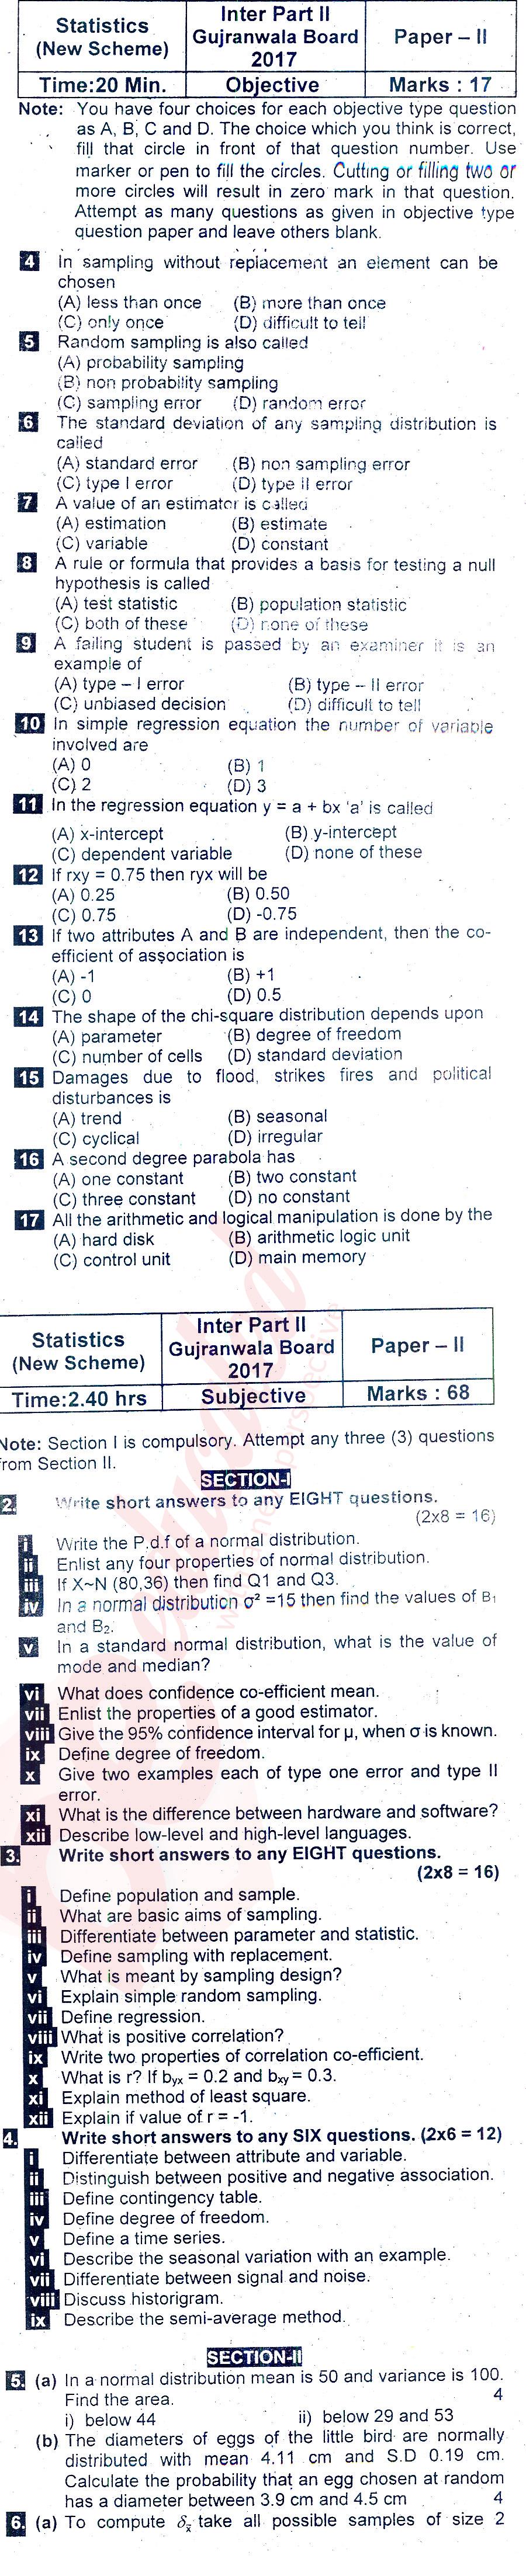 Statistics 12th class Past Paper Group 2 BISE Gujranwala 2017